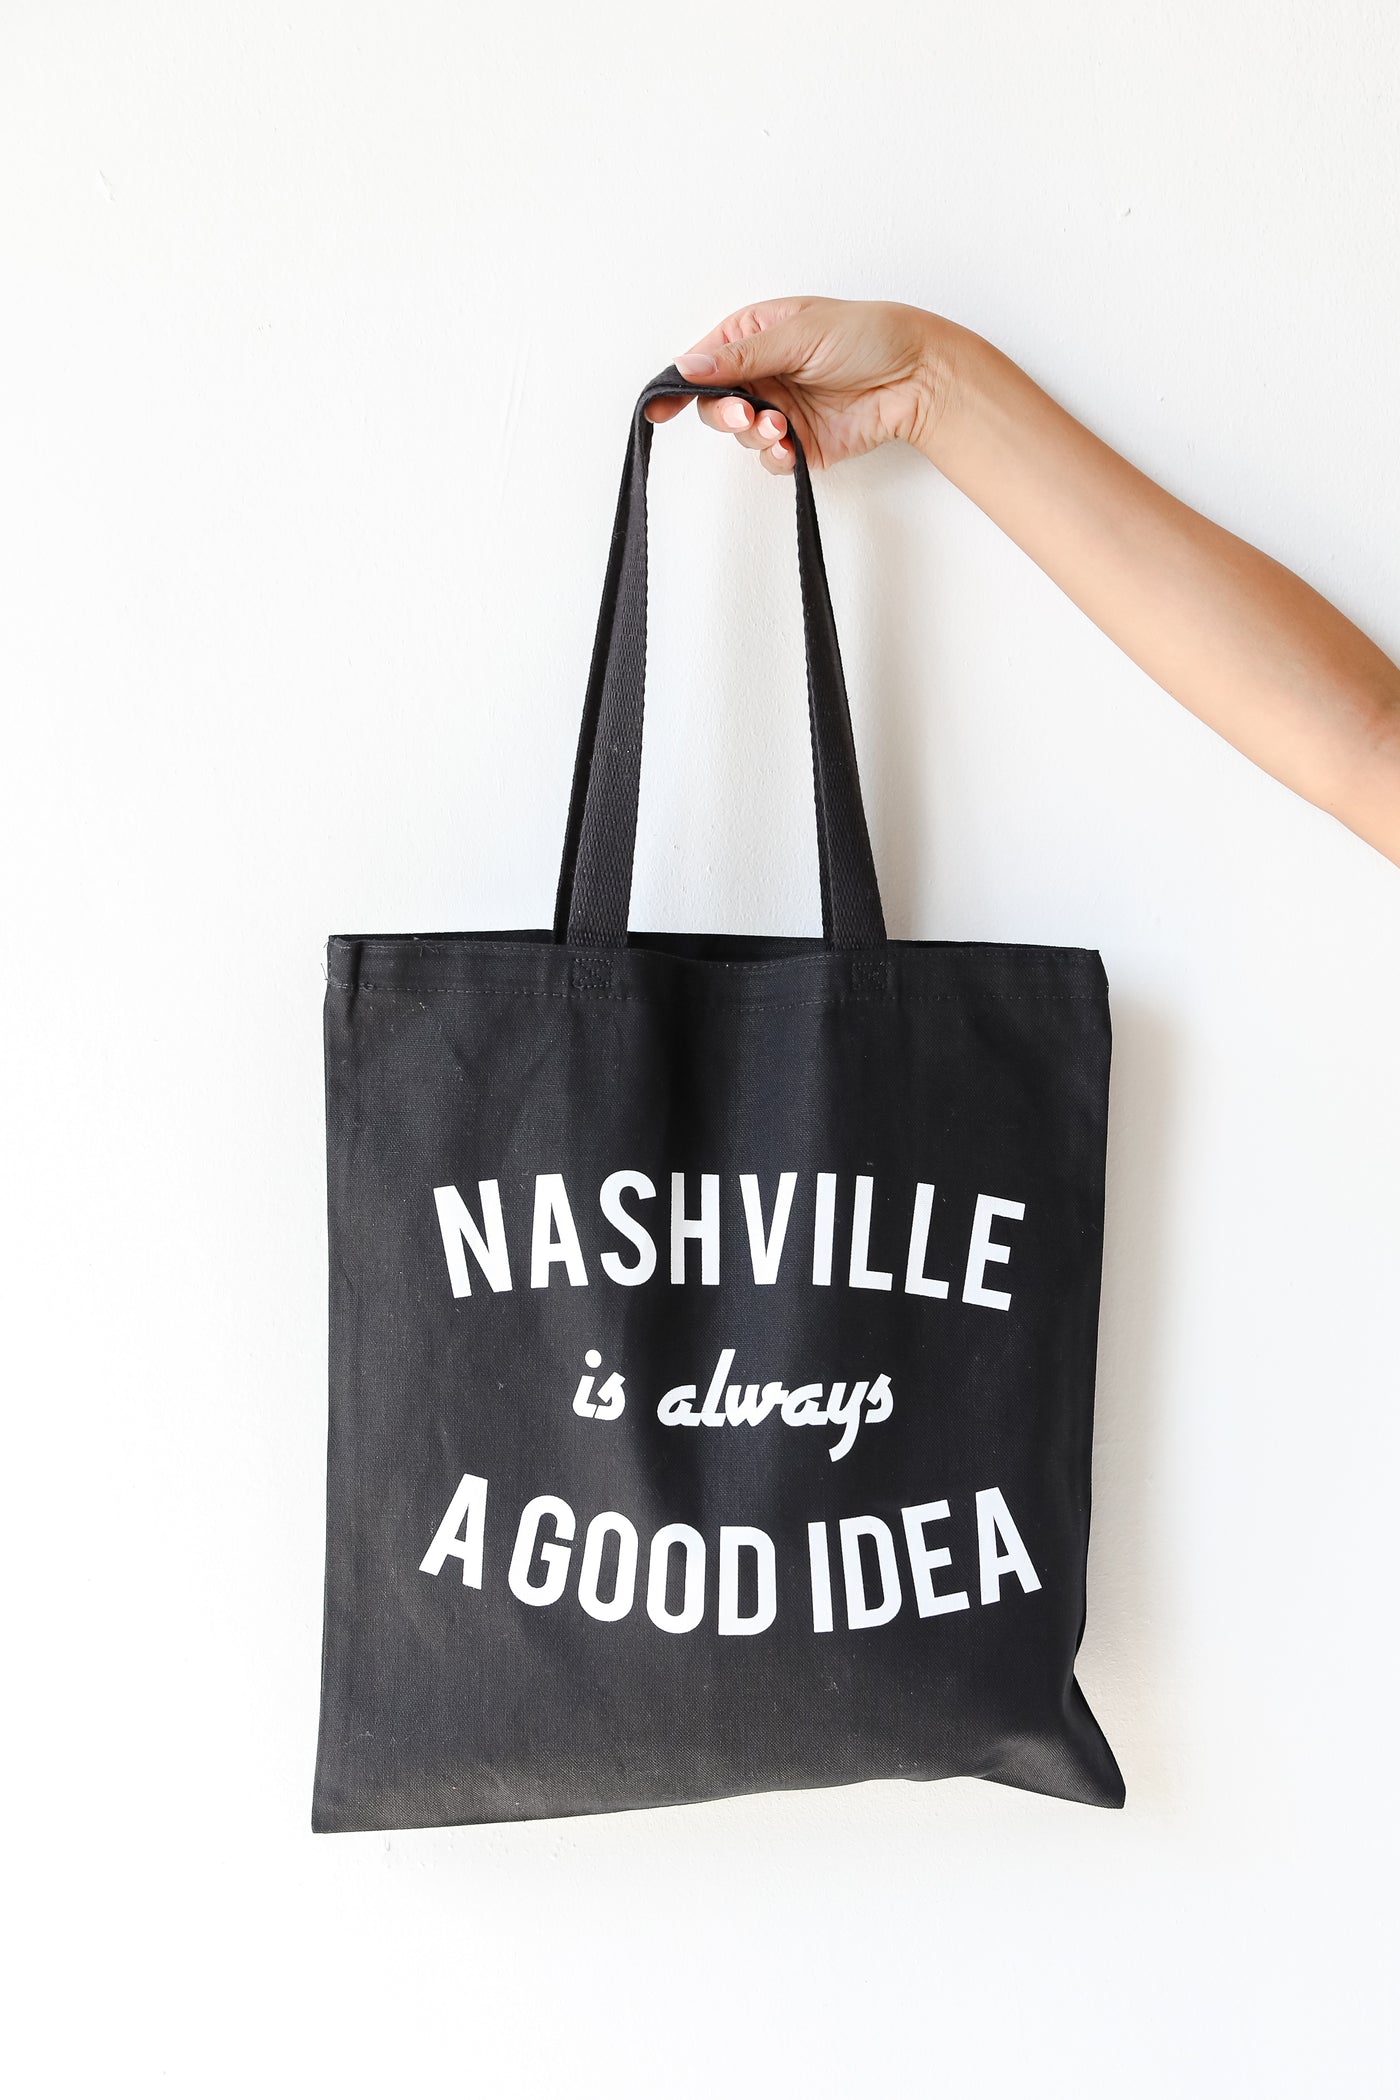 Nashville Is Always A Good Idea Tote Bag front view